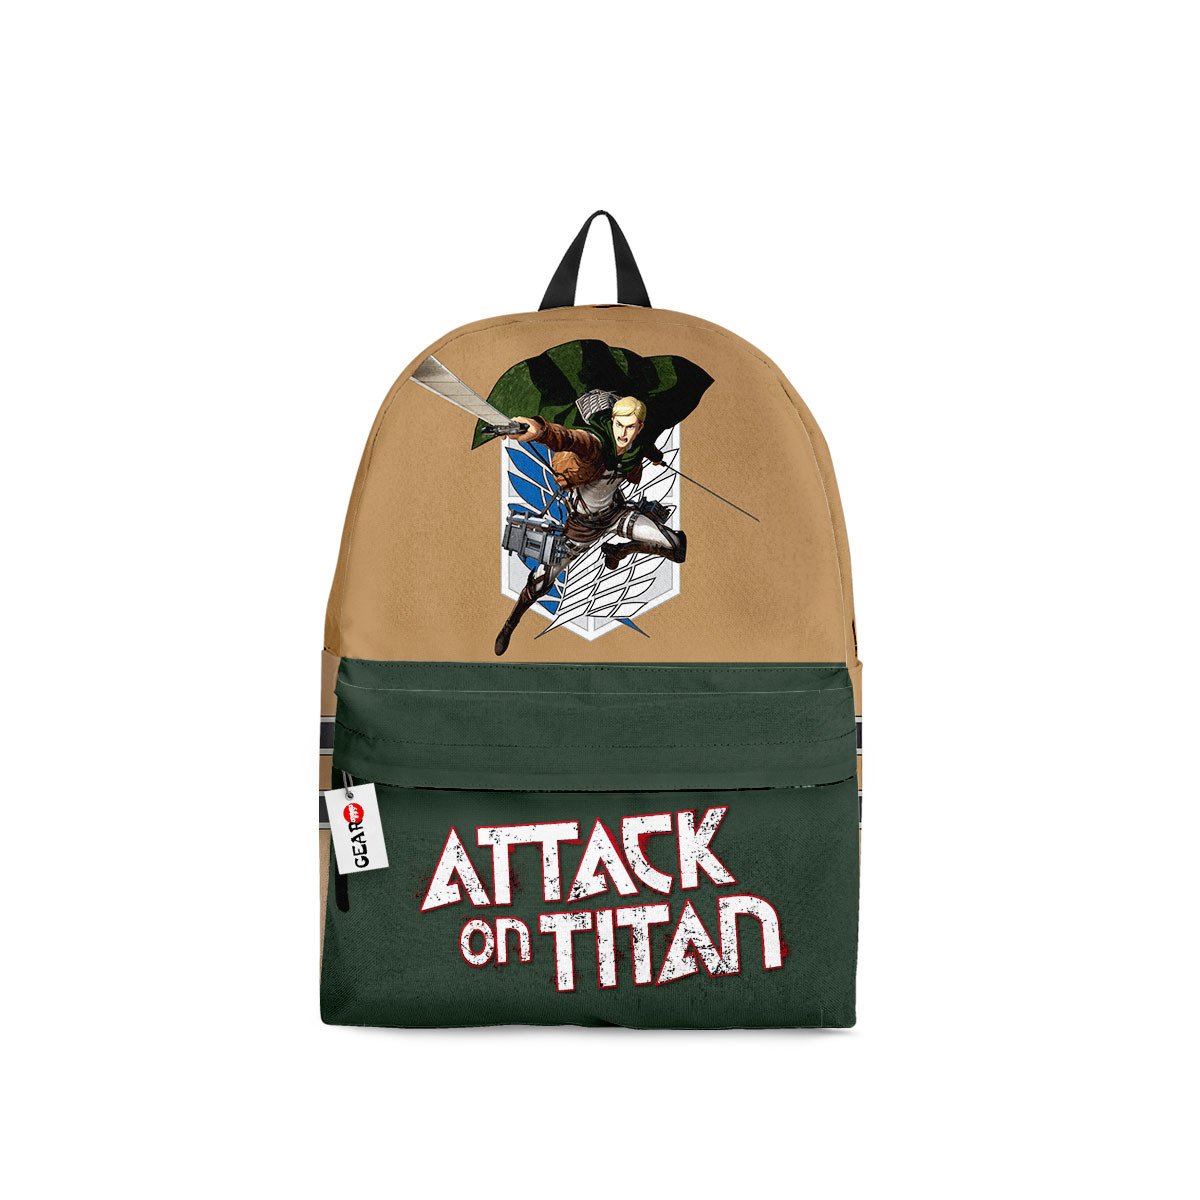 BEST Erwin Smith Attack On Titan Anime Printed 3D Leisure Backpack